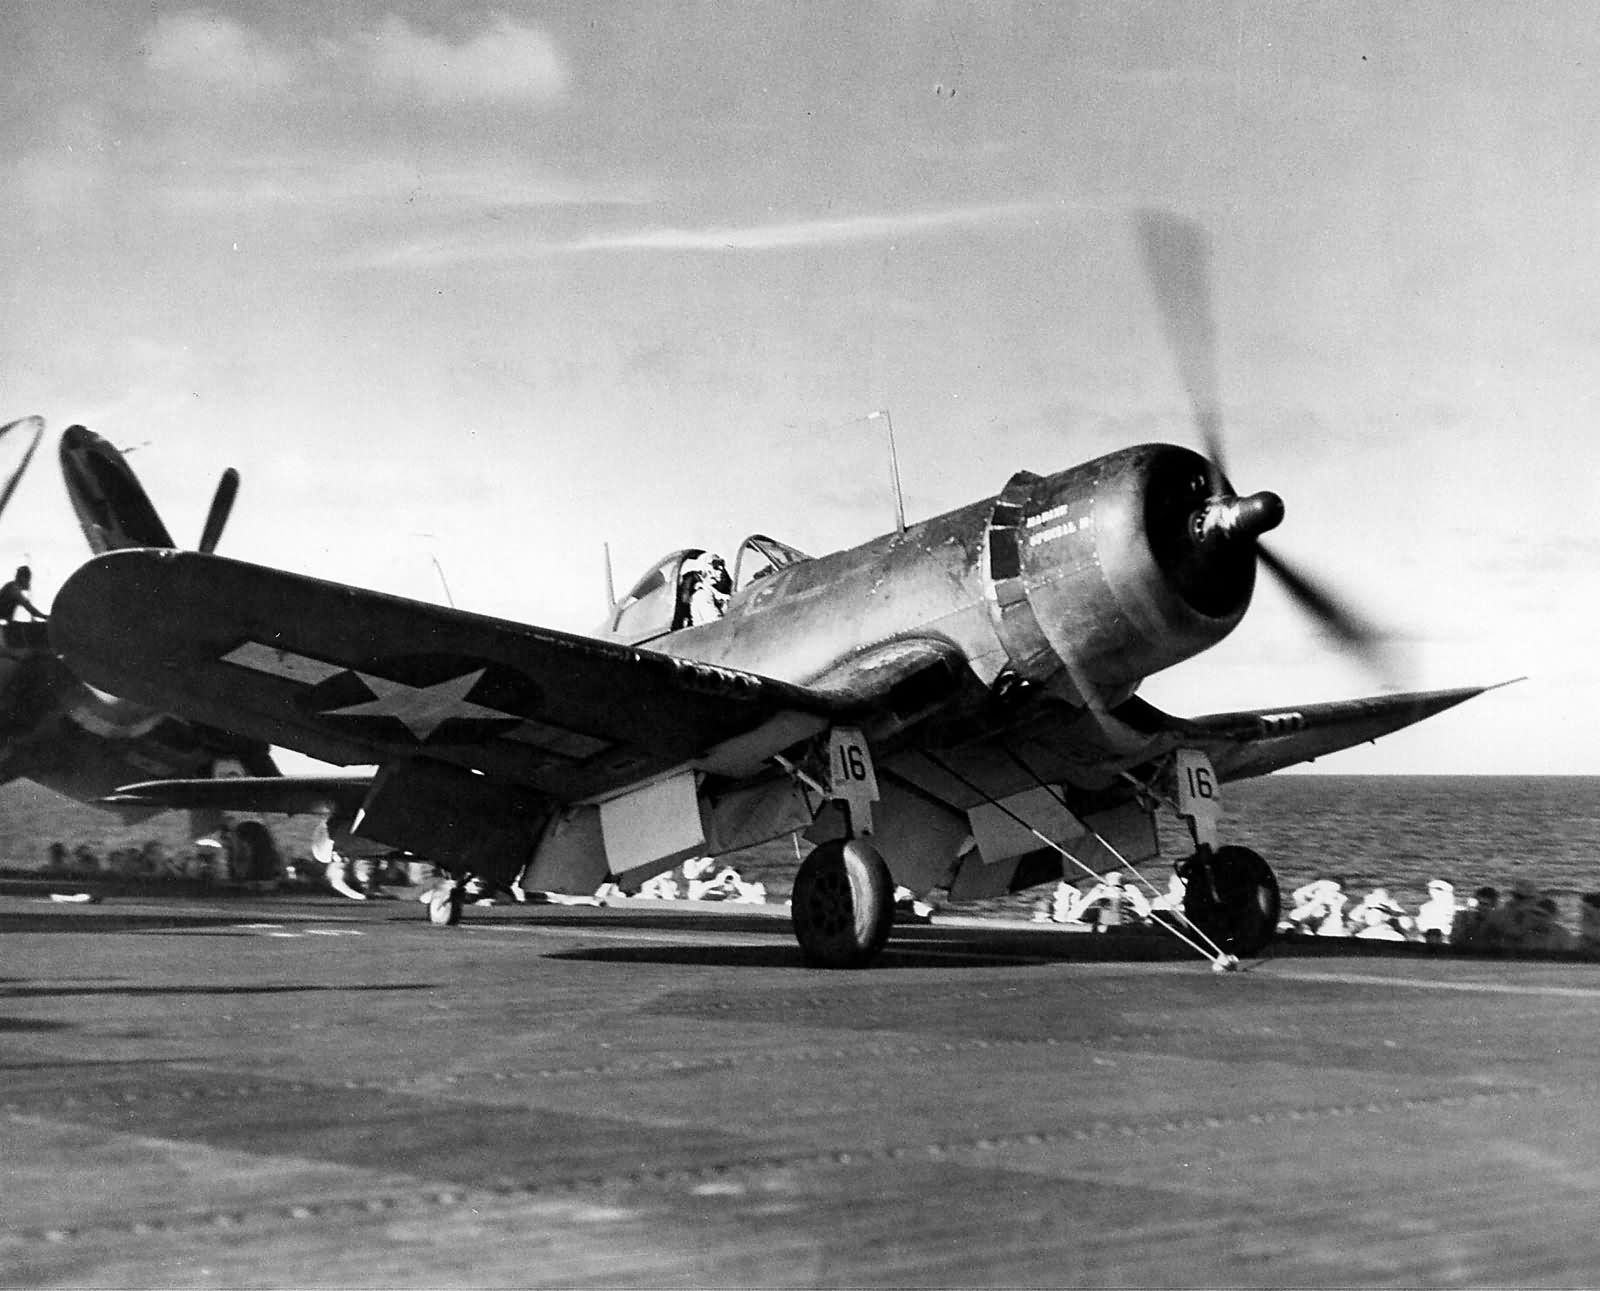 F4u 1a Corsair 16 Of Vmf 422 Hooked Up To A Catapult And Ready For